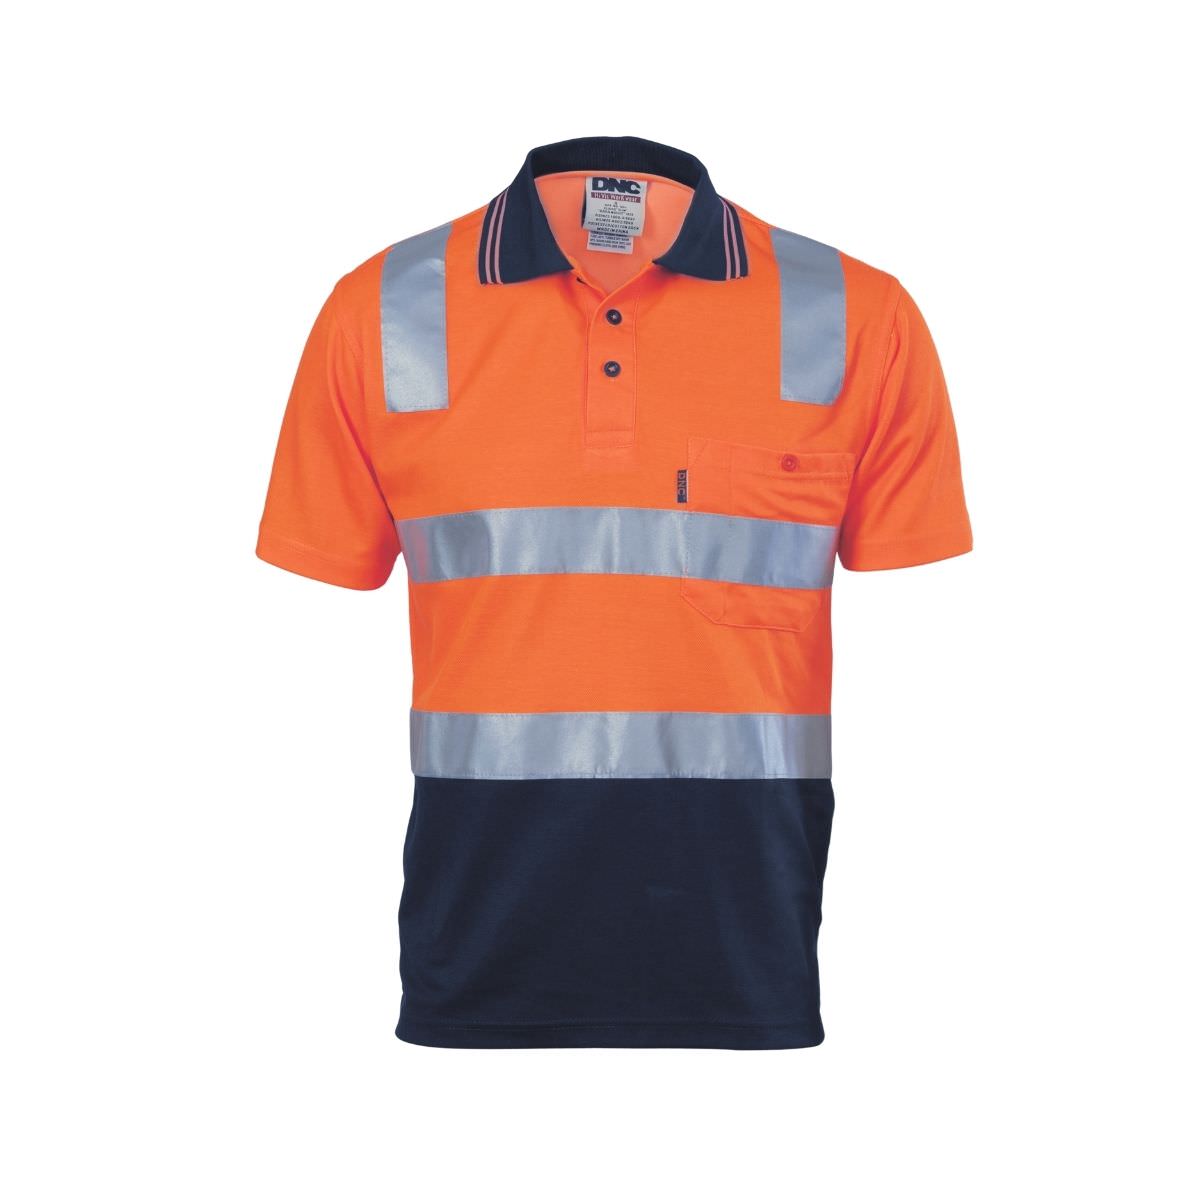 DNC Hi Vis Two Tone Cotton Back Polo with CSR Reflective Tape - short sleeve 3817